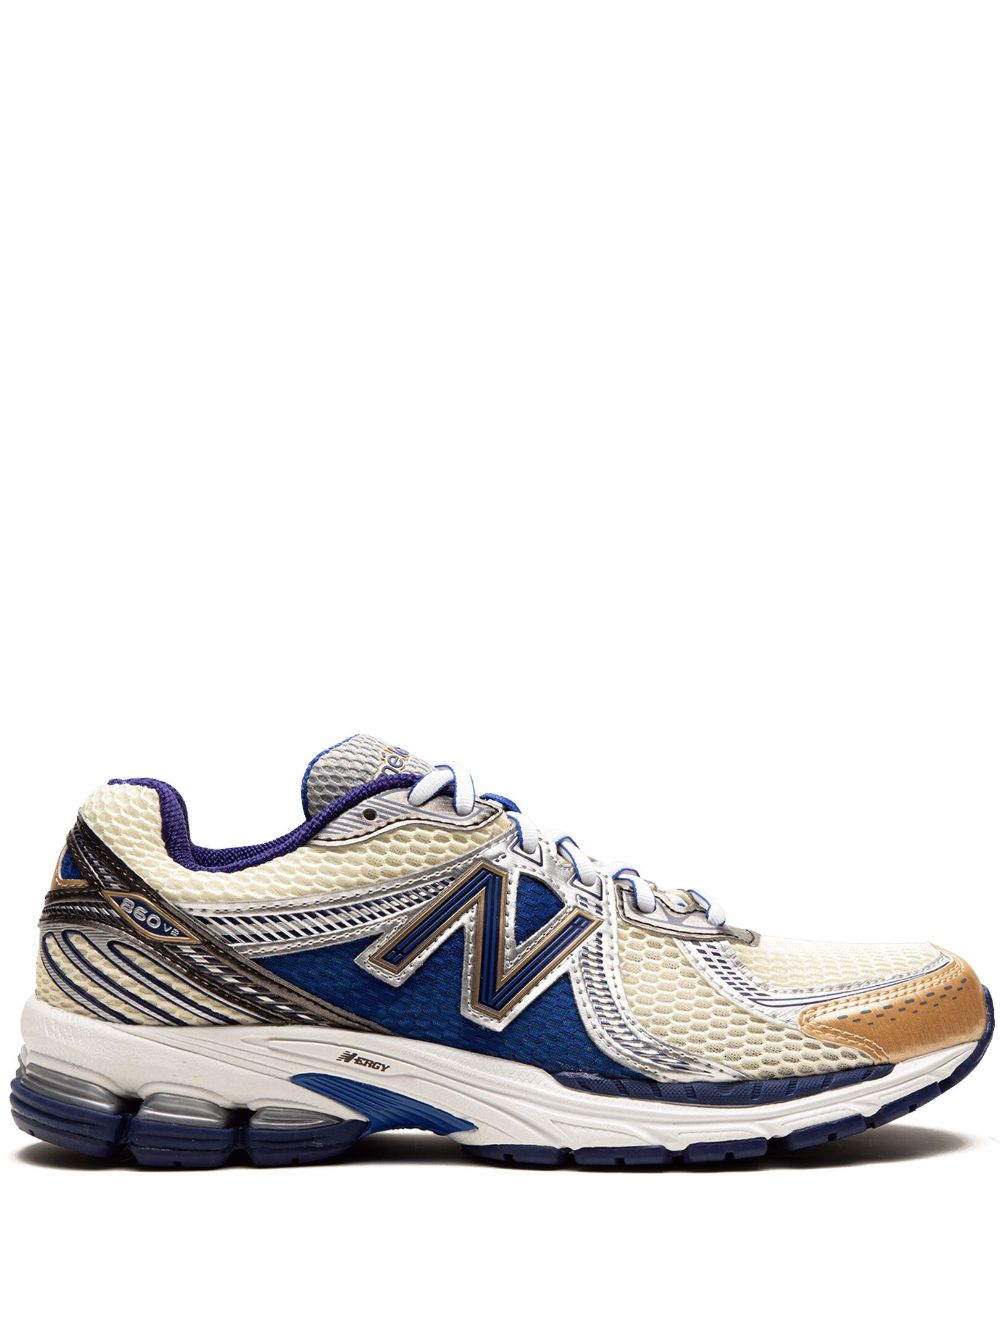 New Balance X Ald 860v2 Sneakers In Blue